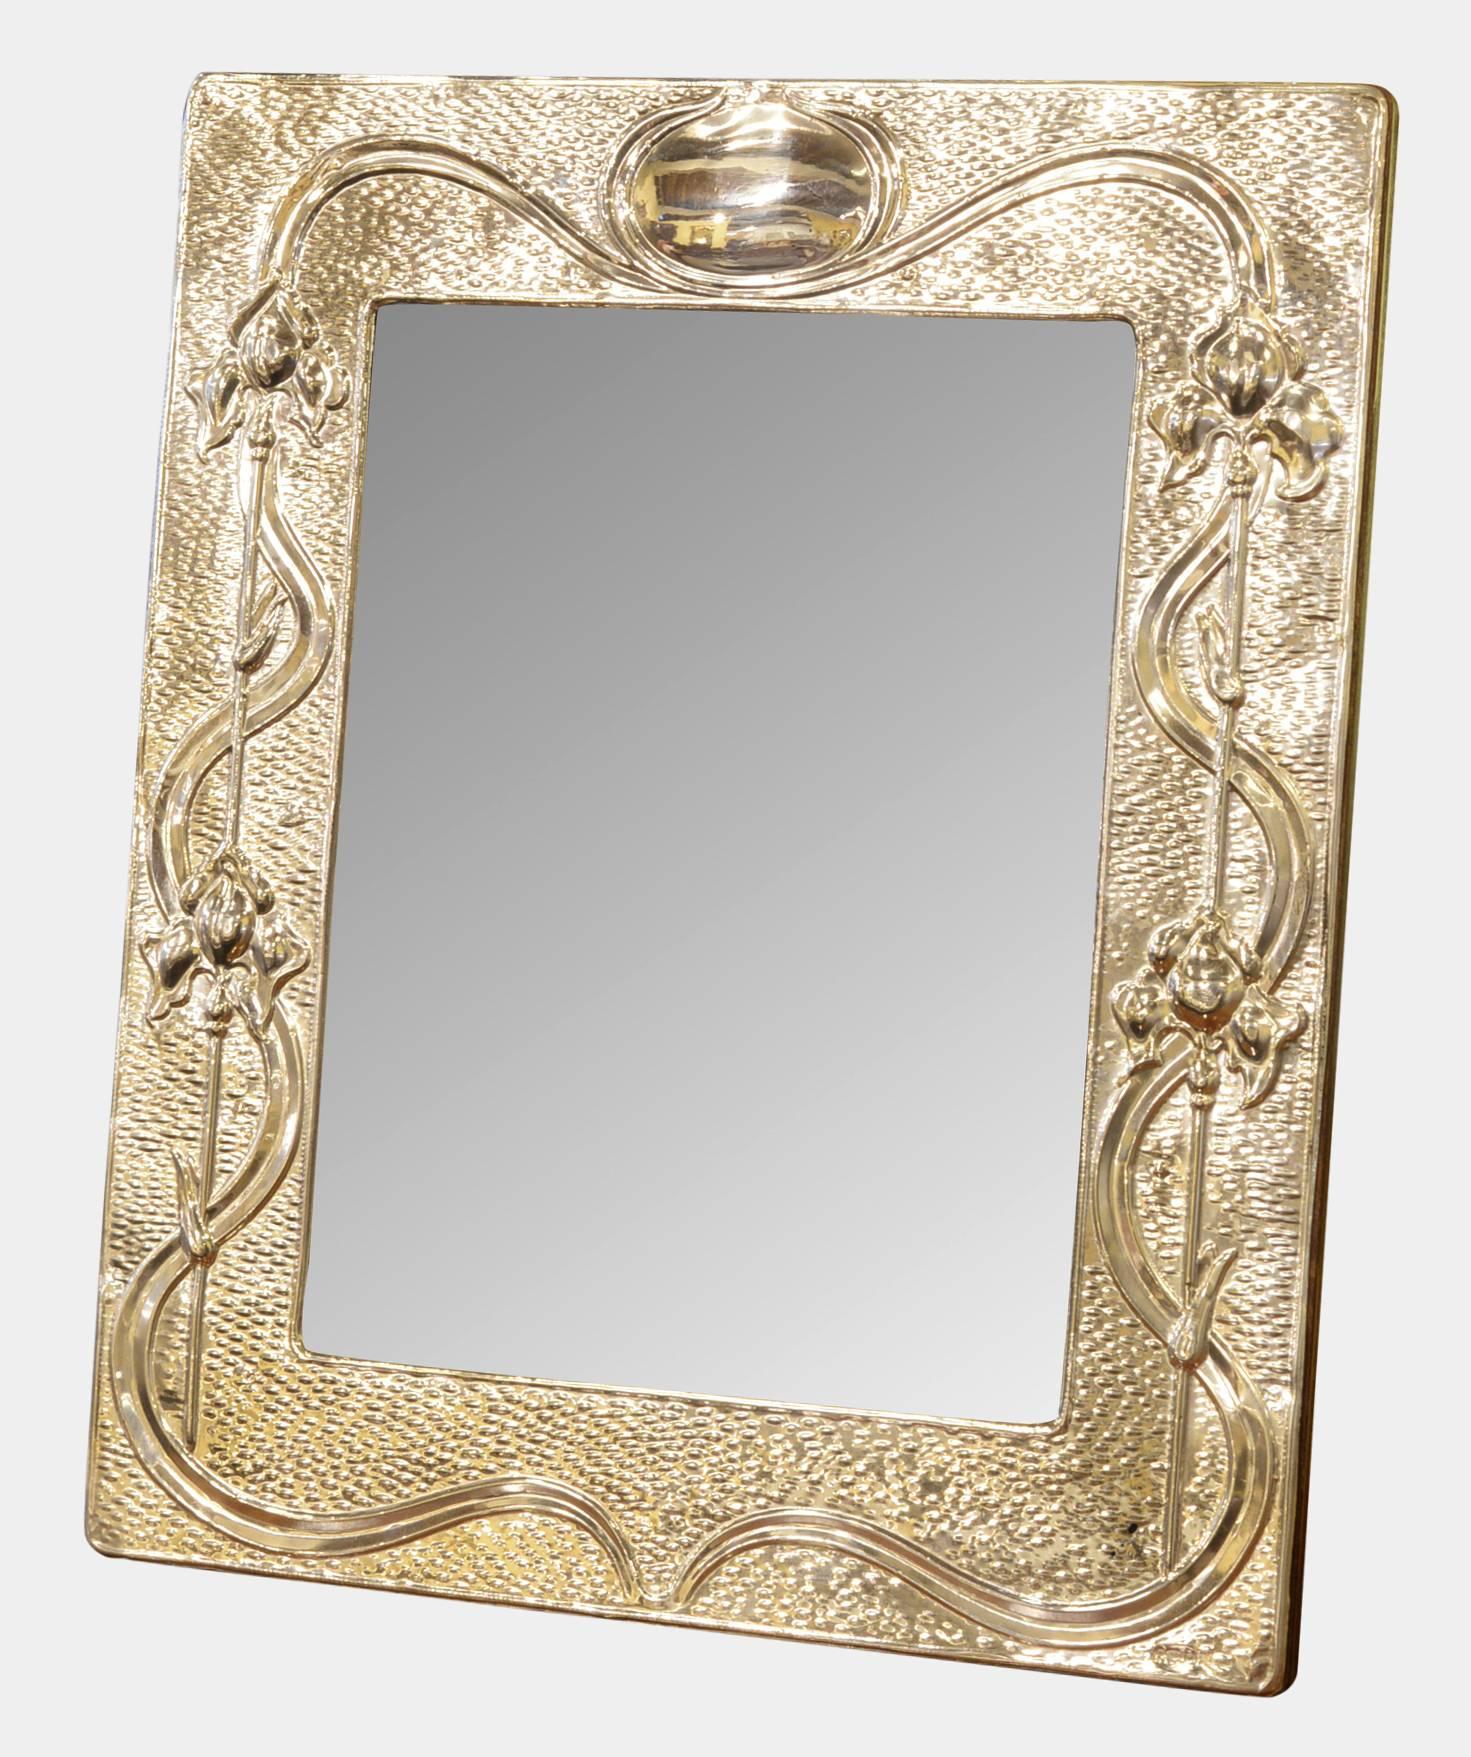 Contemporary Art-Nouveau Style Sterling Silver Picture Frame